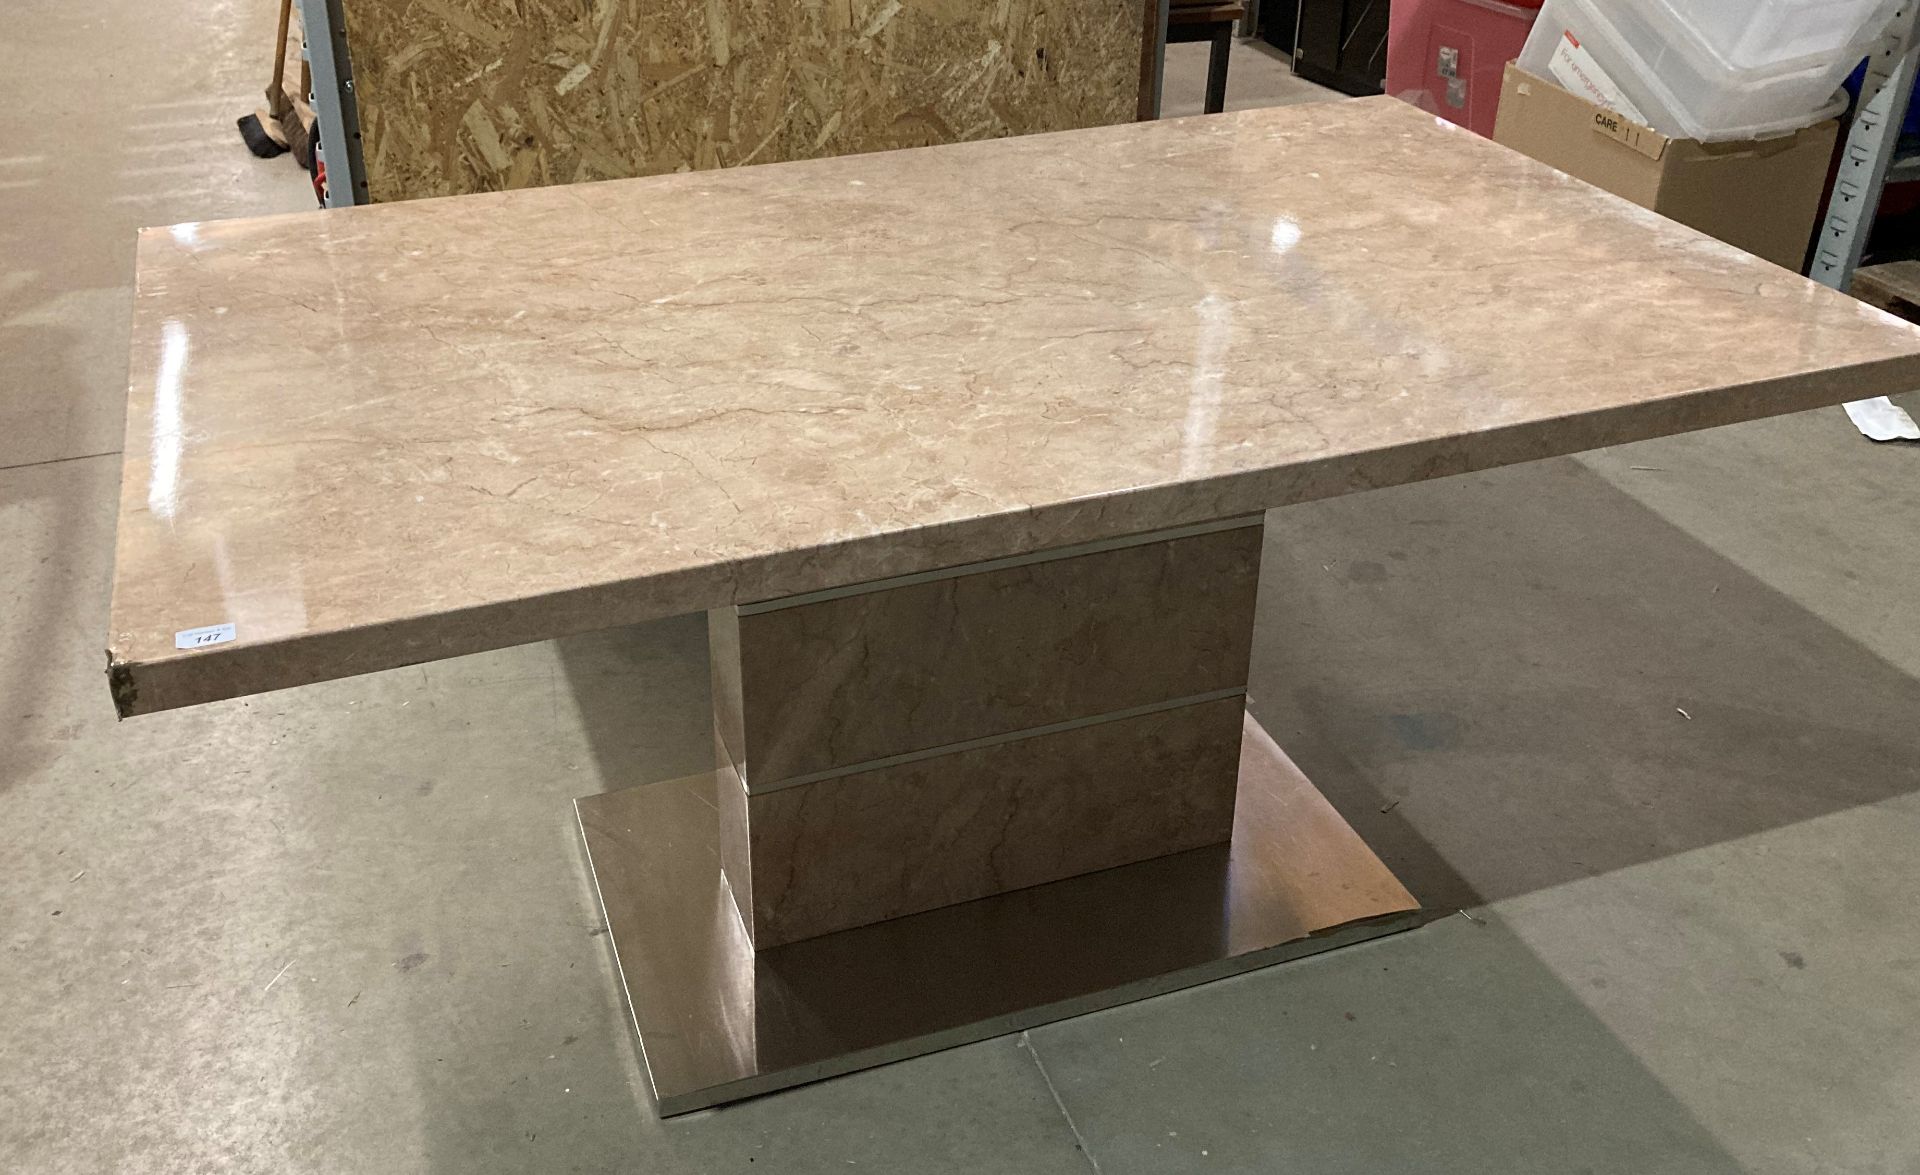 Imitation marble topped table on centre